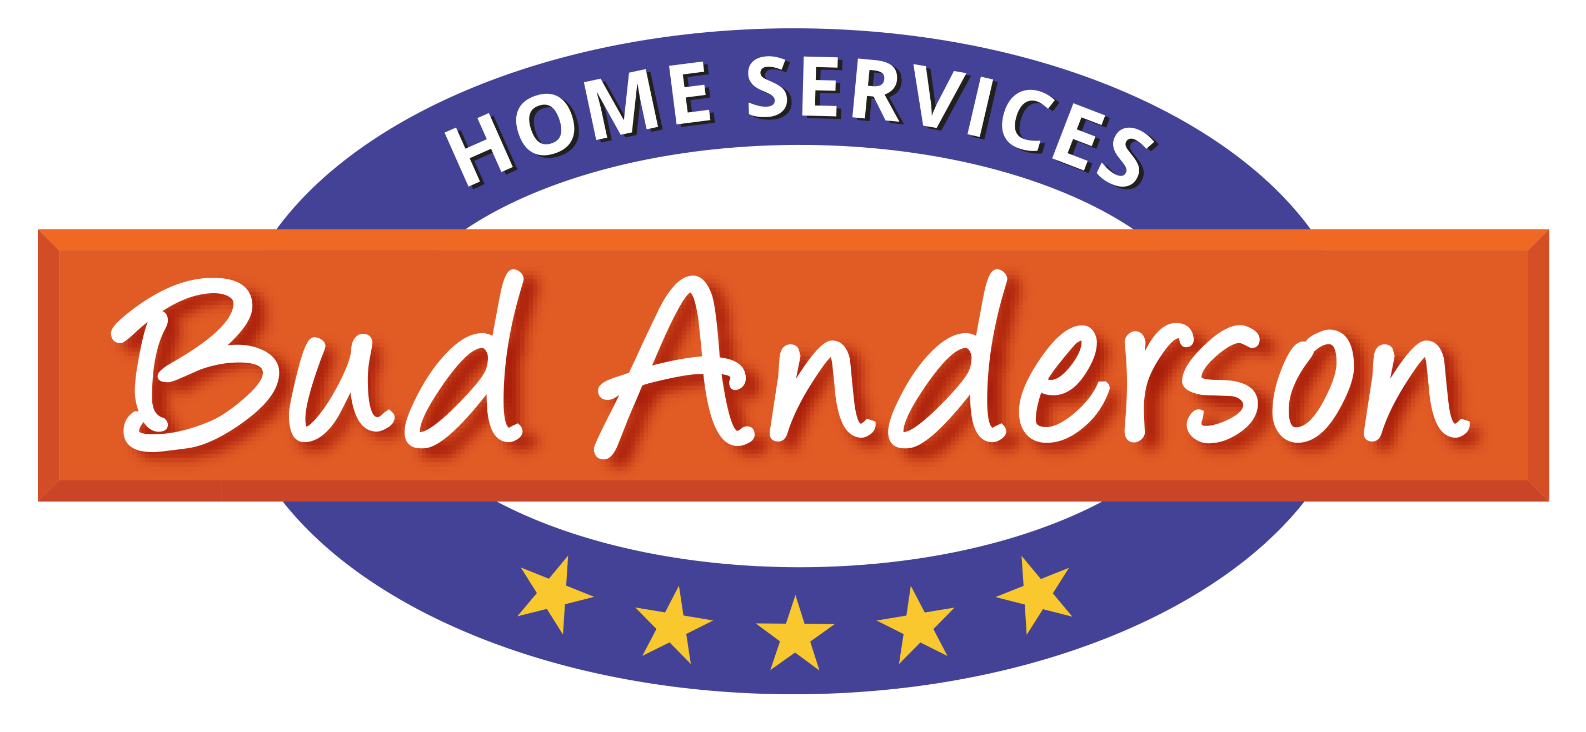 Bud Anderson Home Services LLC Logo